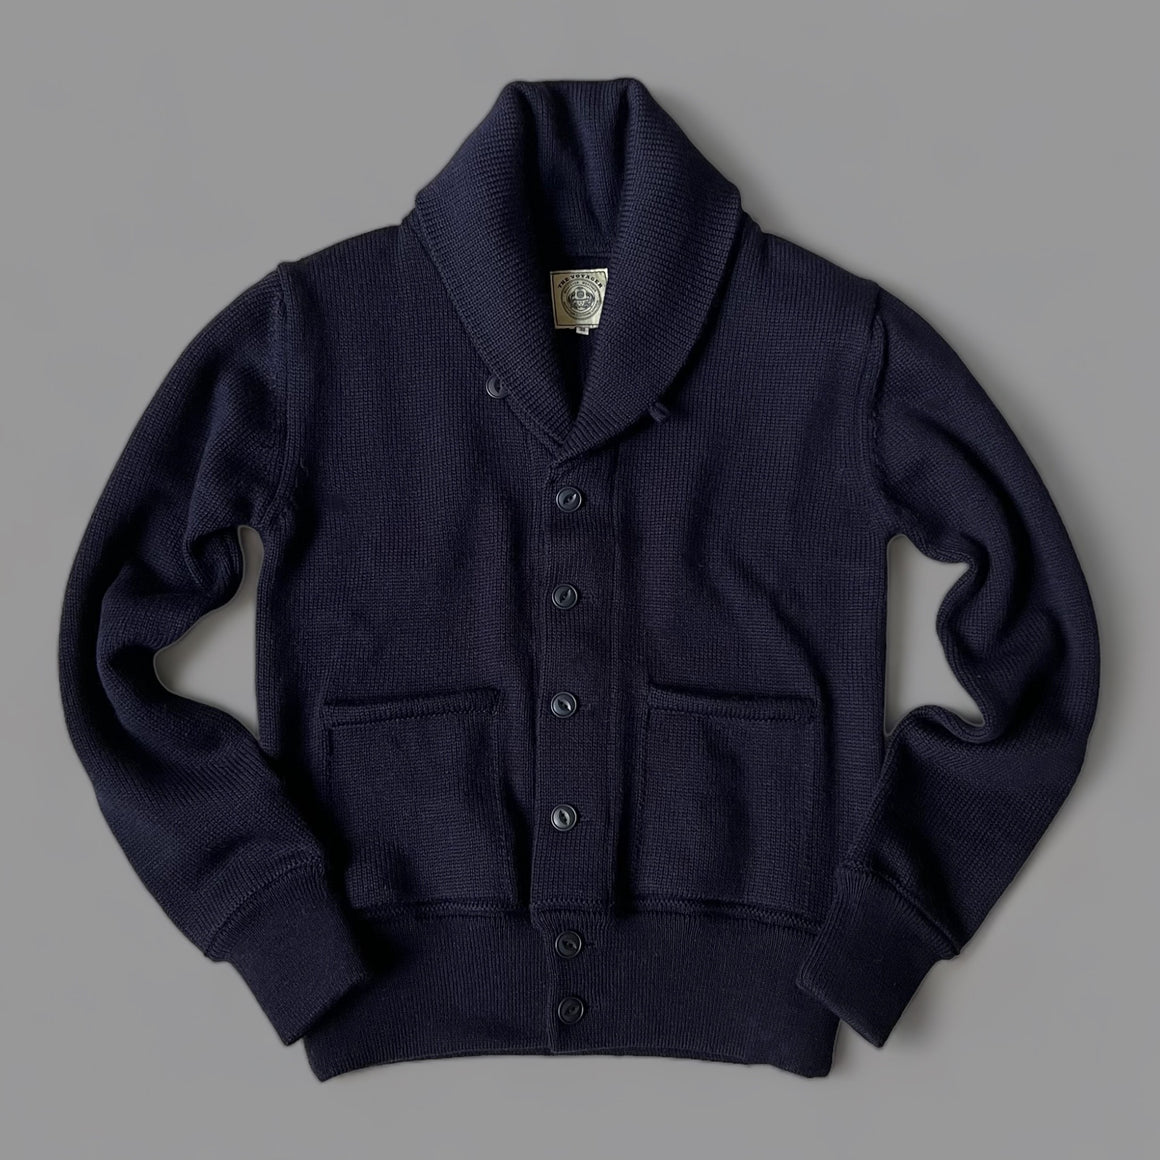 THE NEW VOYAGER CARDIGAN - NAVY BLUE